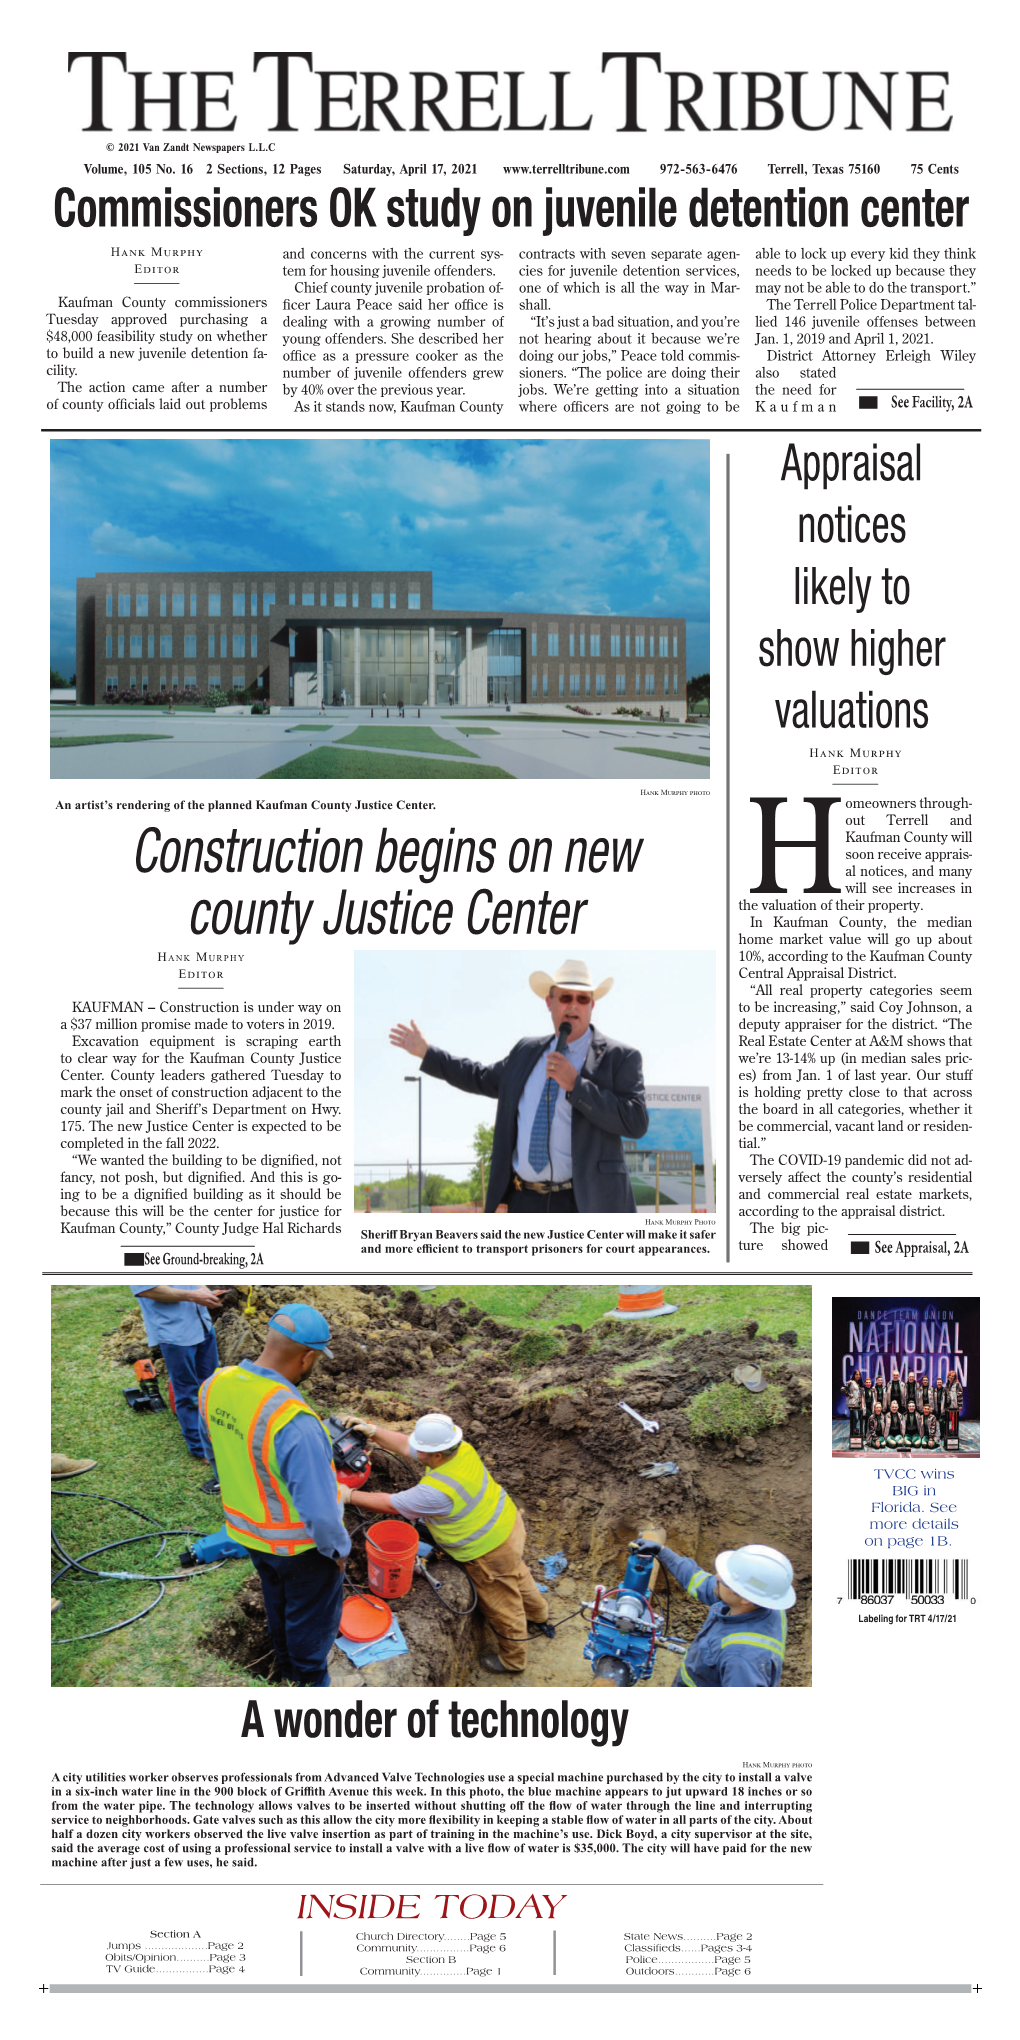 Construction Begins on New County Justice Center